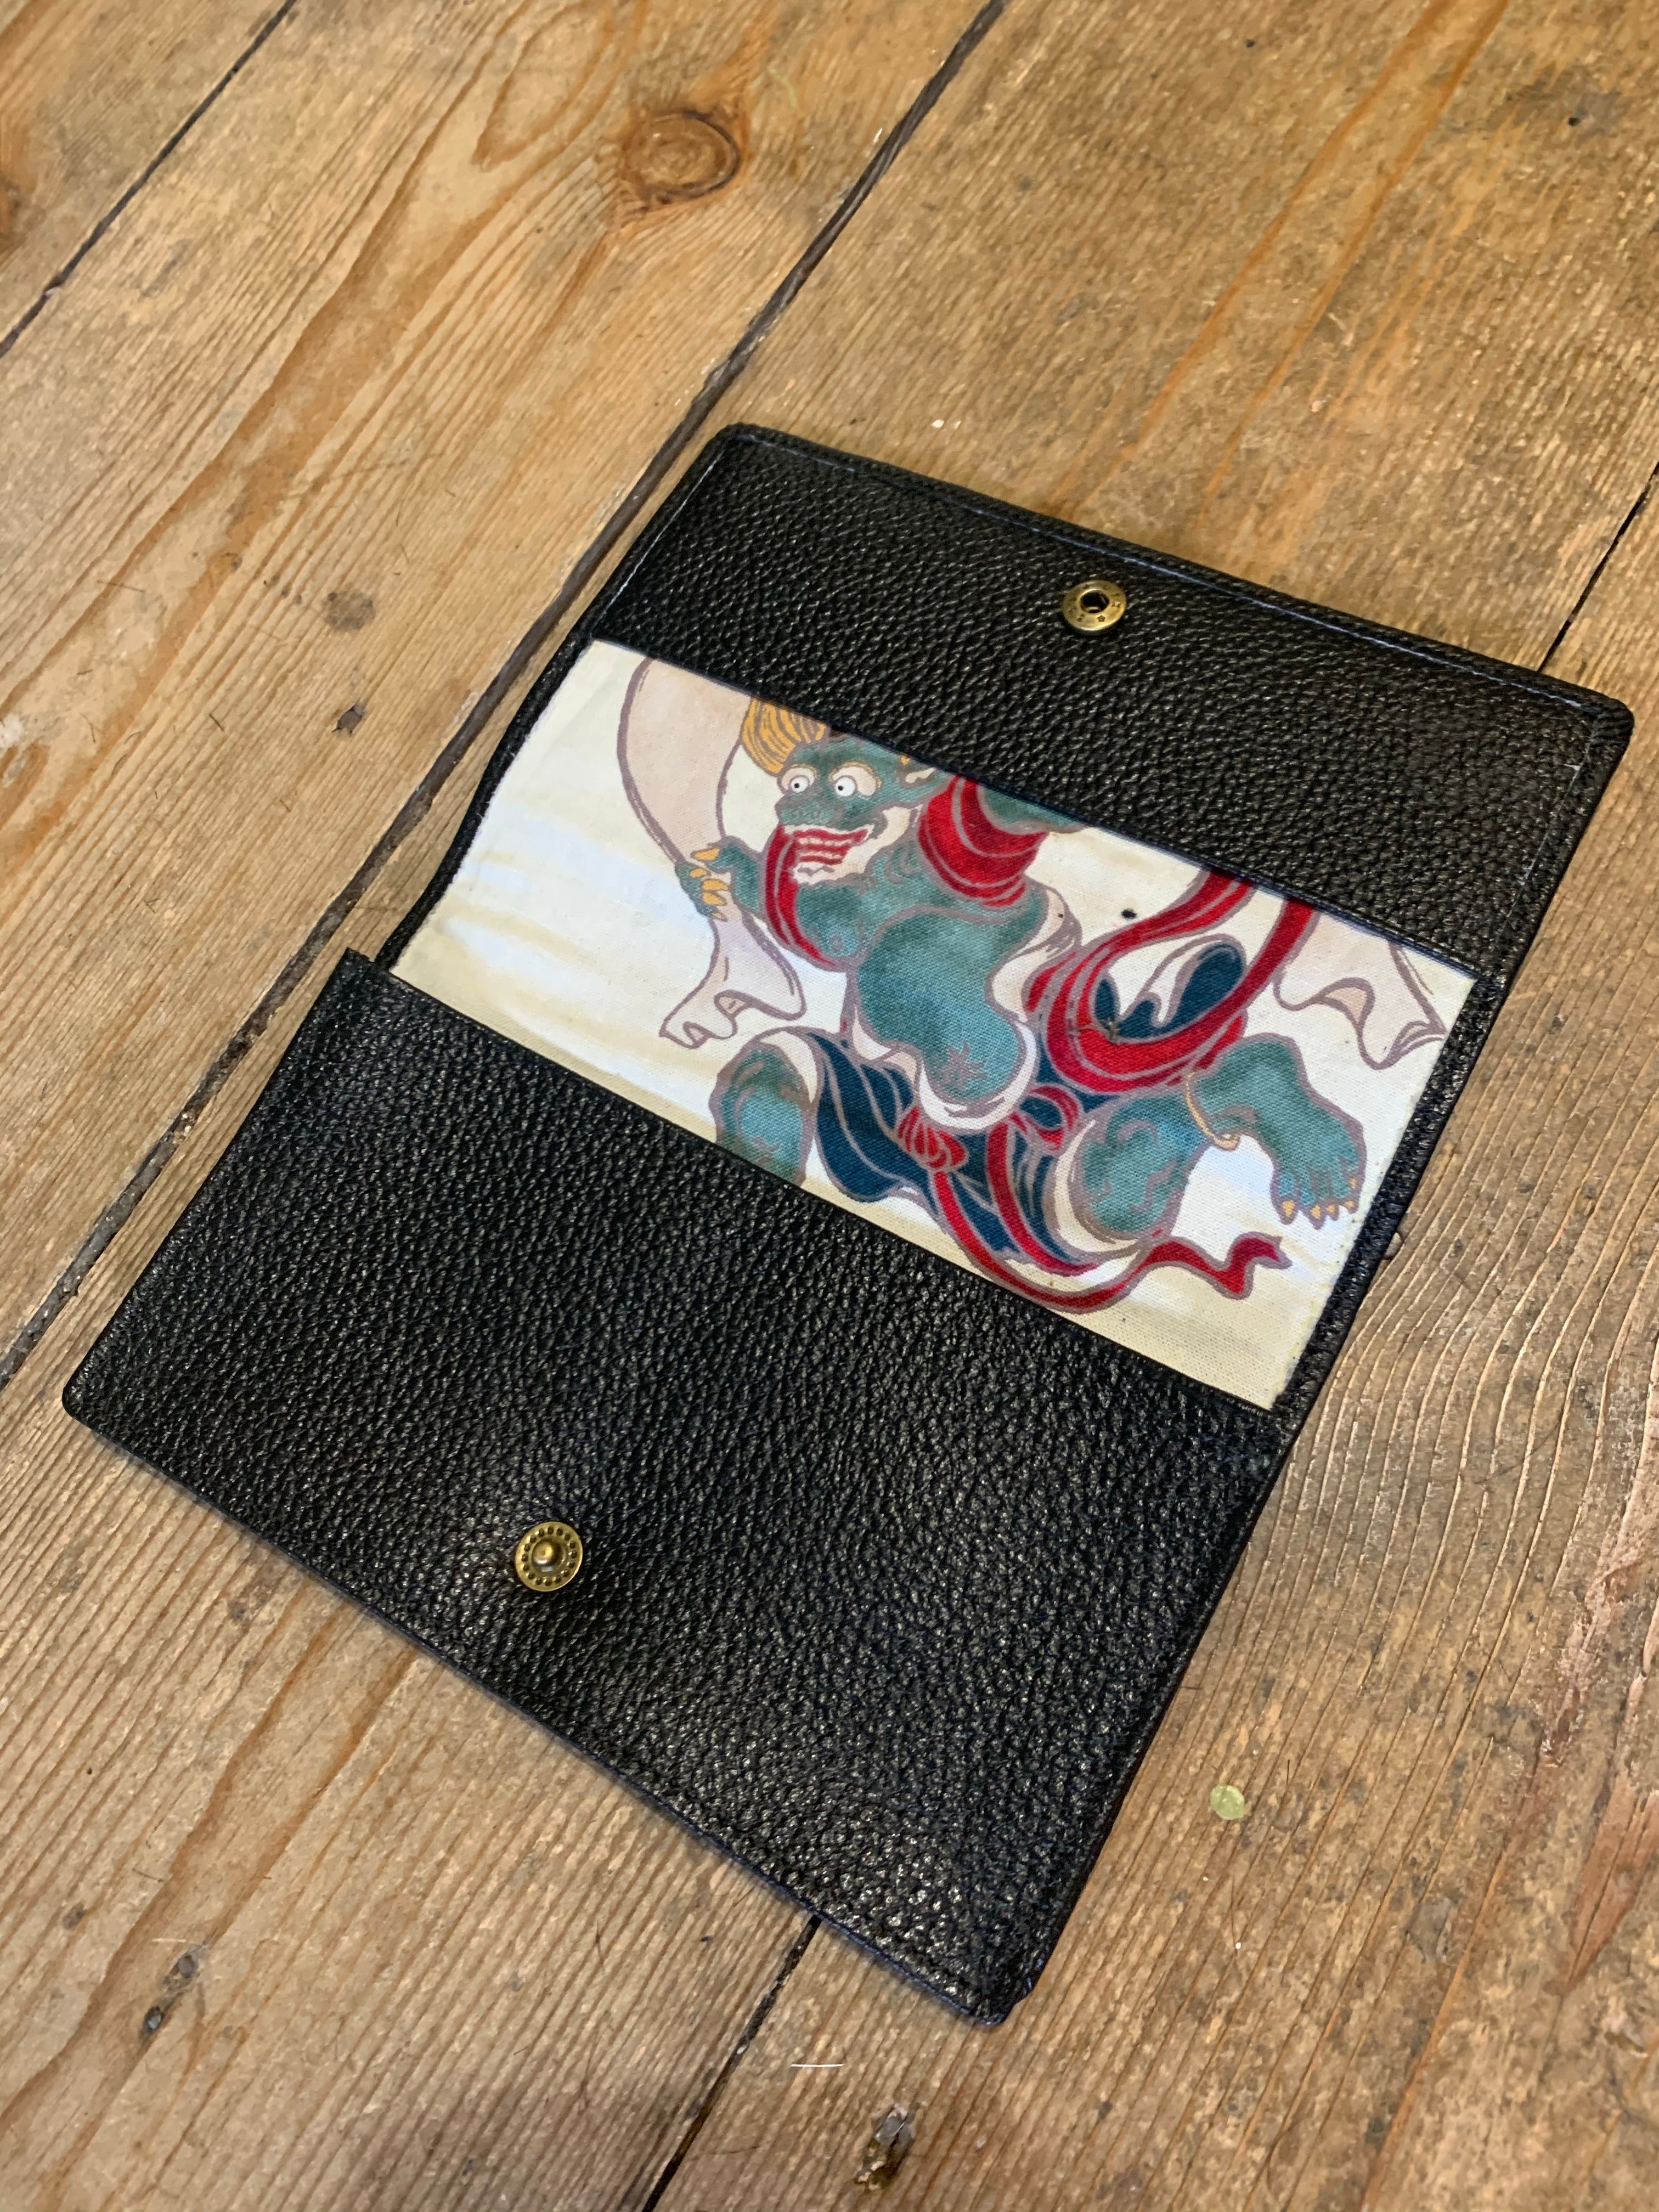 Black Tobacco Pouch - Japanese Mythological | RaySteels Leather Aprons